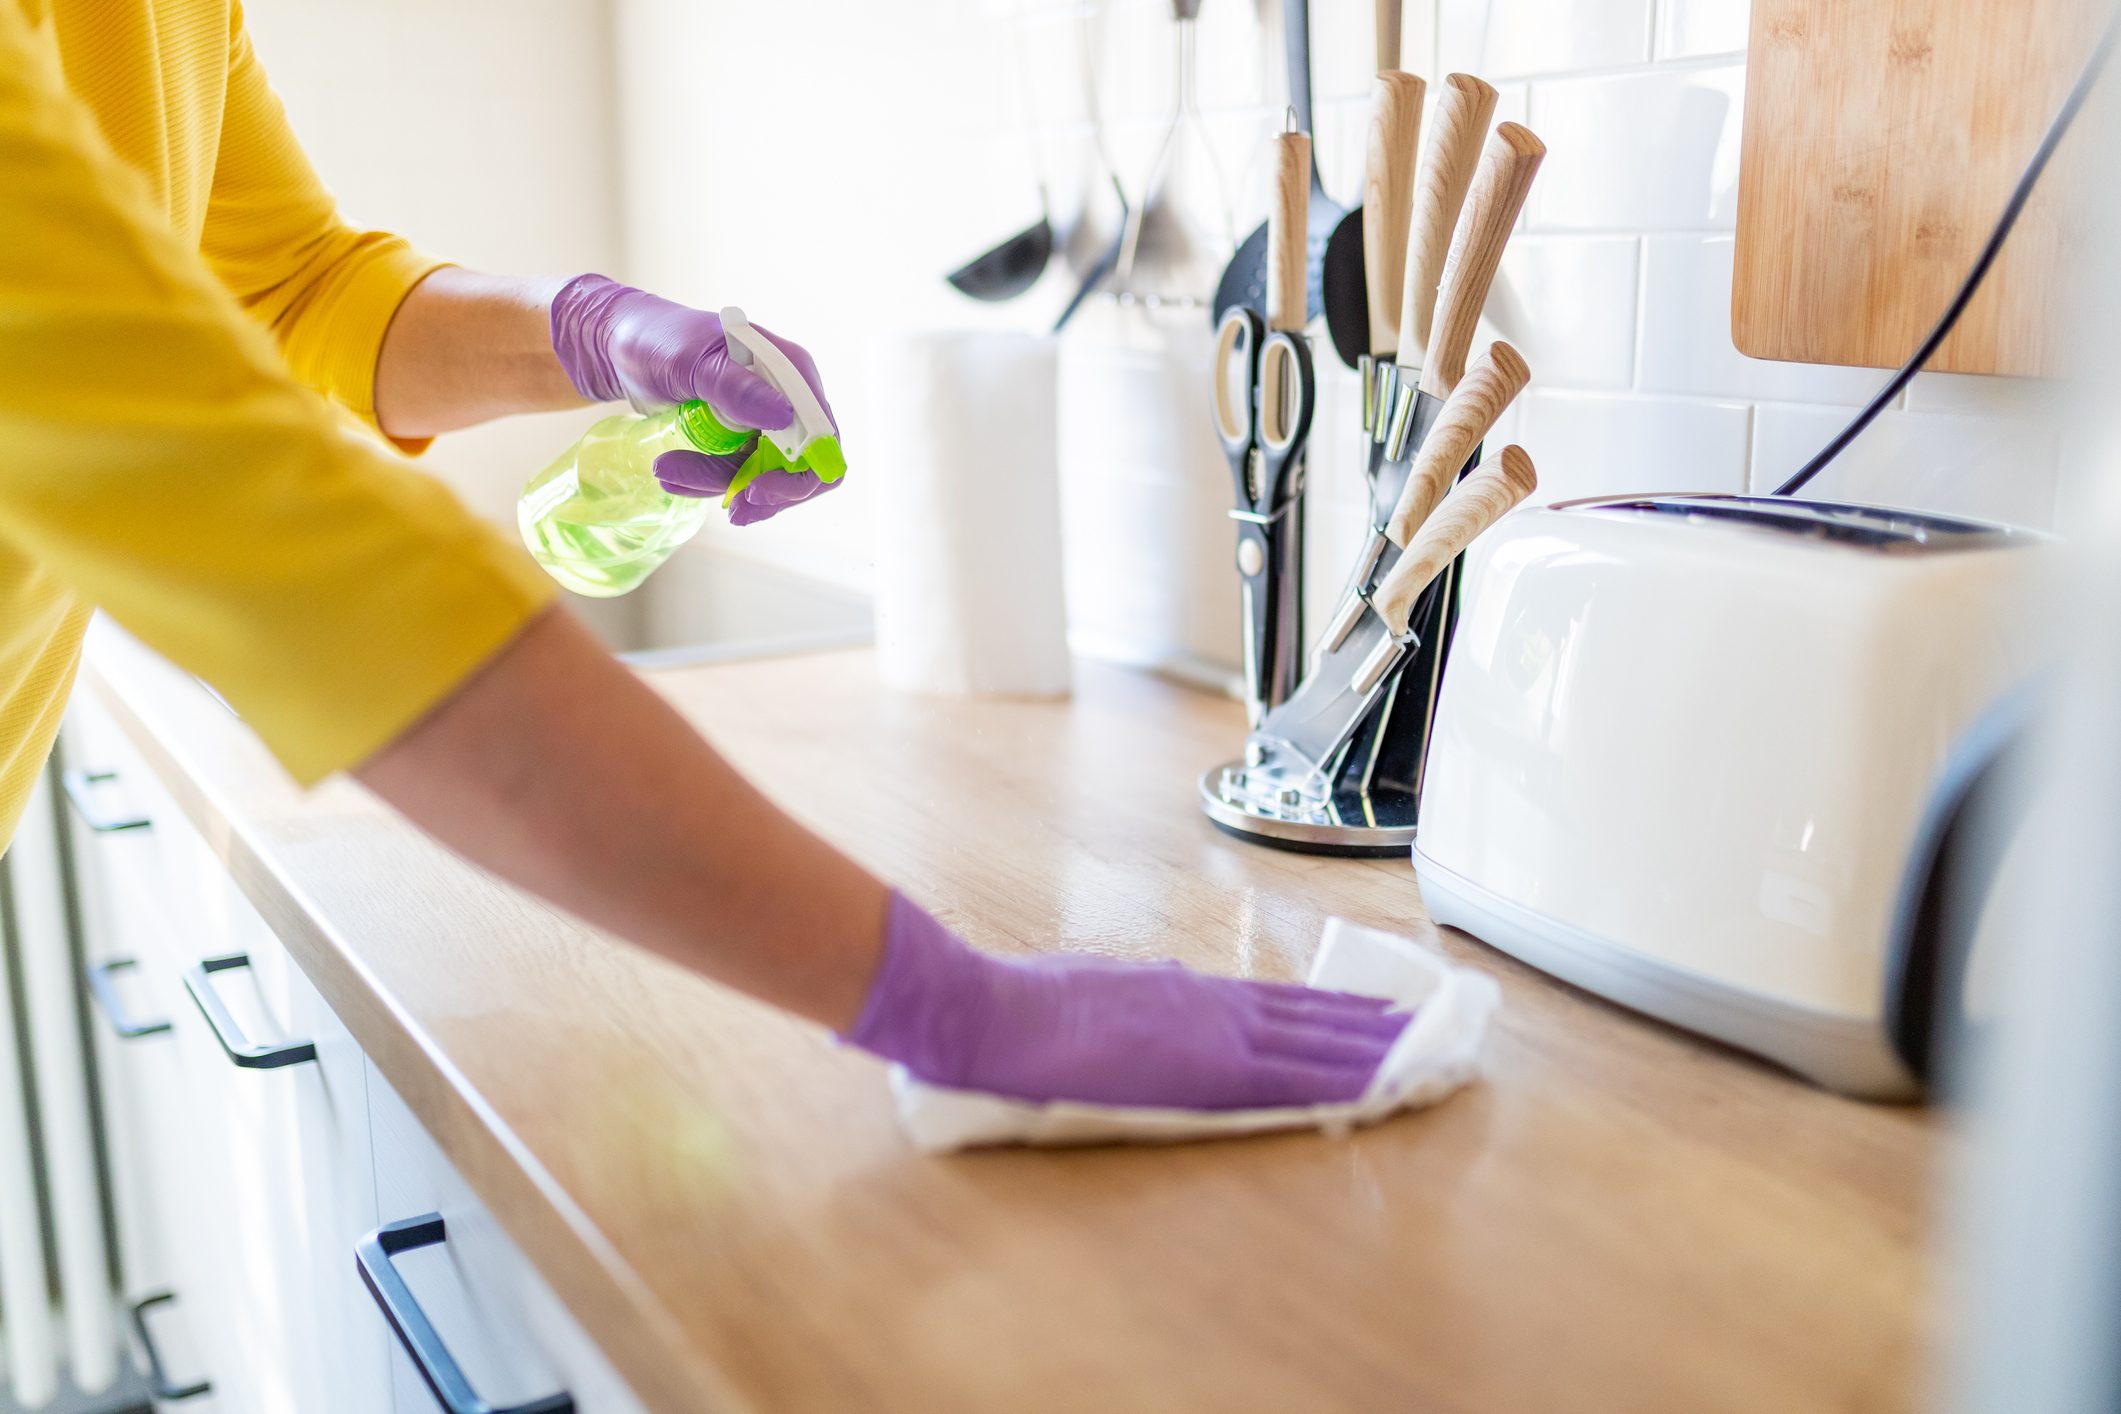 How to Use Degreaser in Your Kitchen: Tips and Tricks